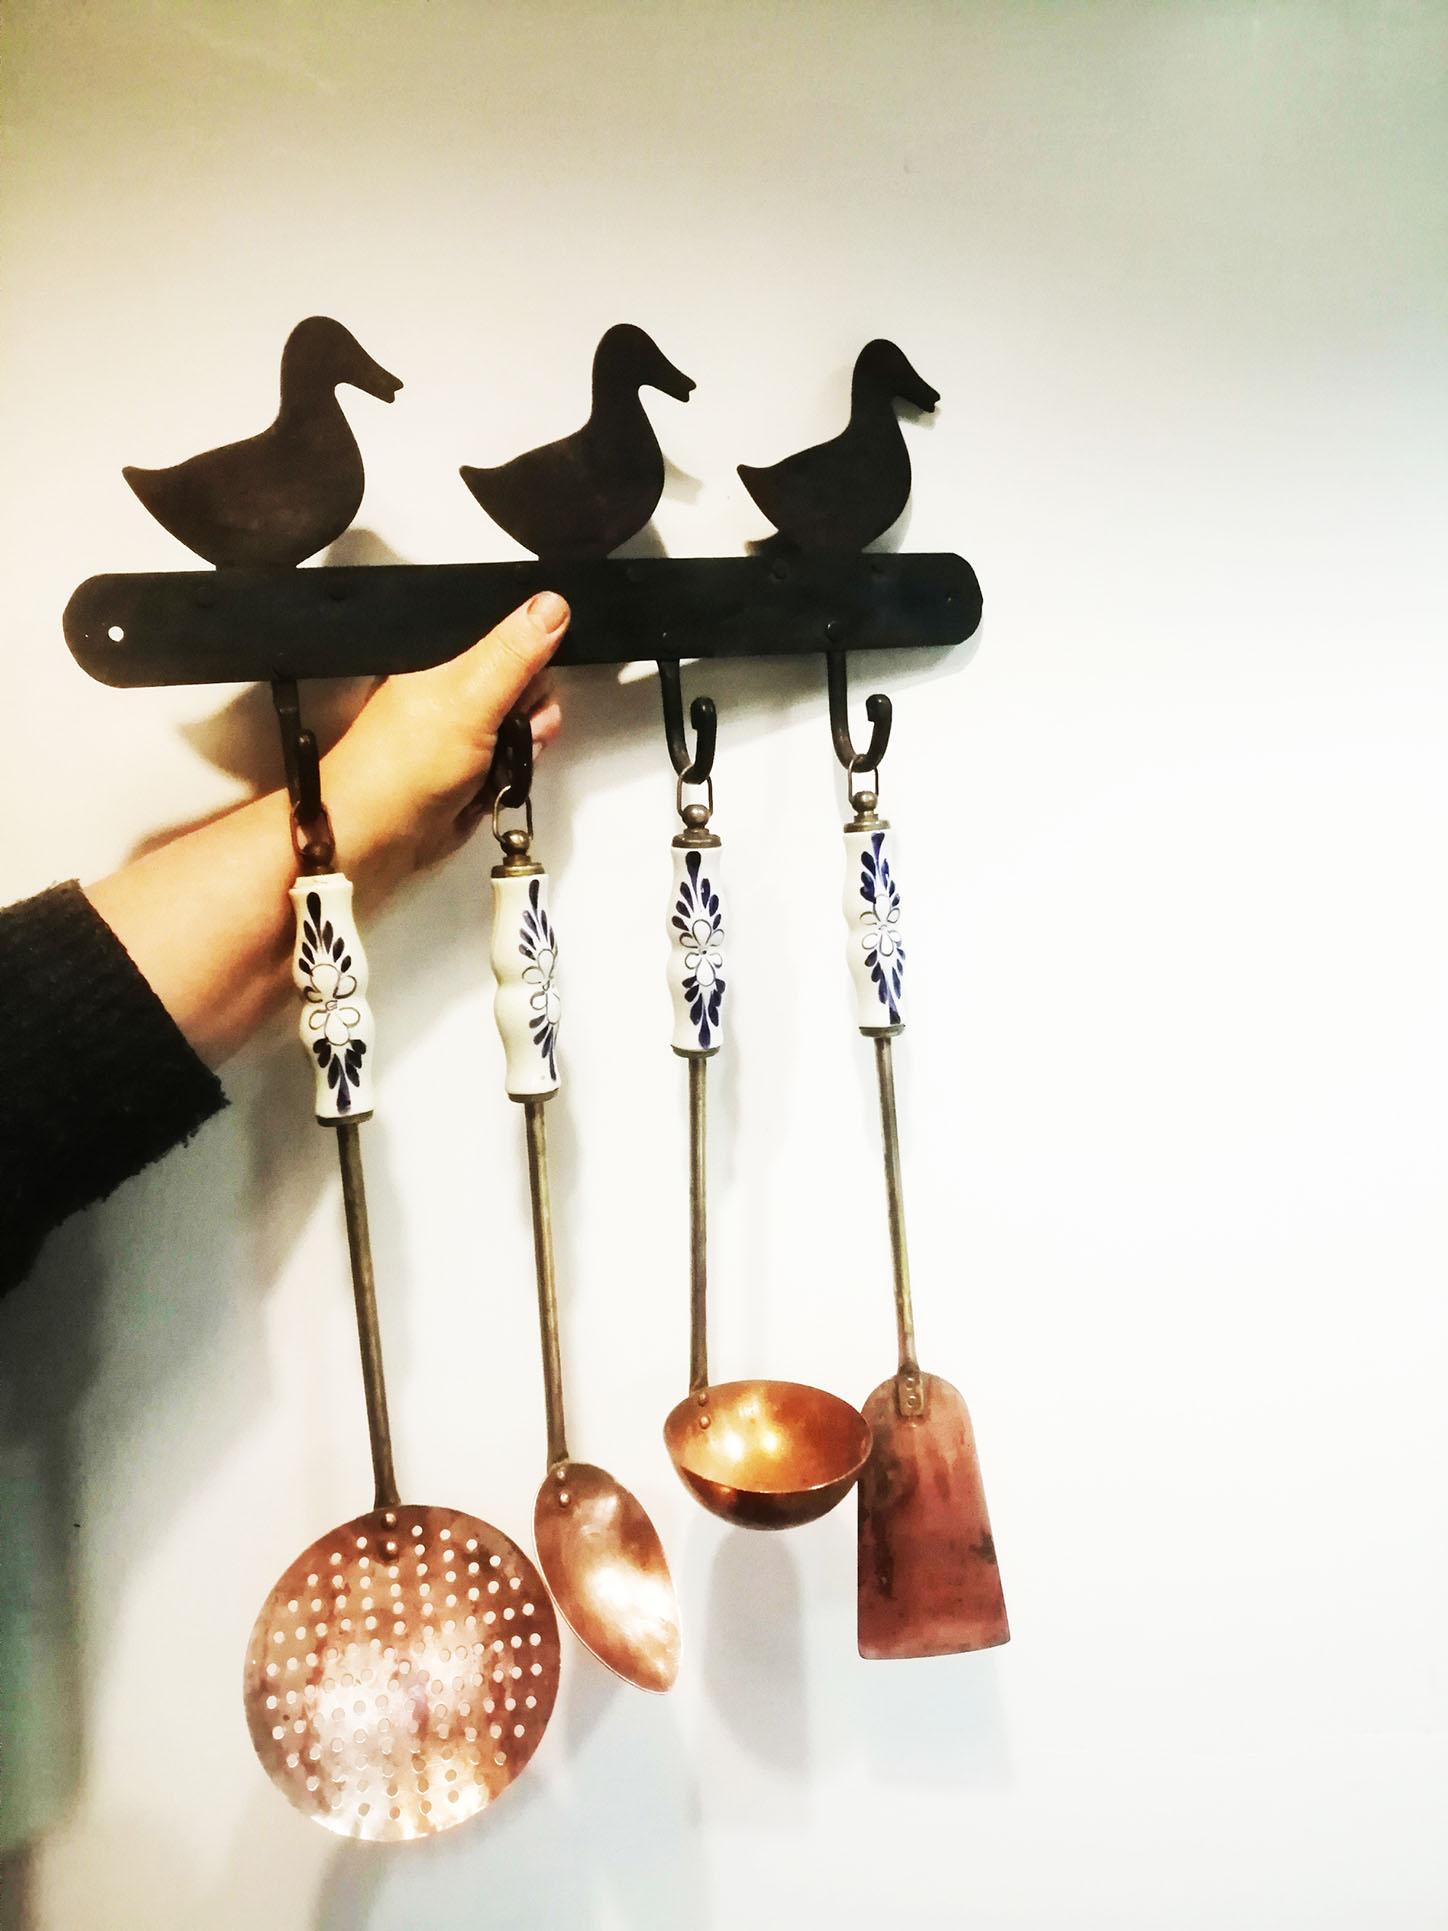 Old kitchen tools or utensils made of copper, ceramic and brass and Iron handmade hanging bar. Old kitchen appliances,

Early 20th century

Saucepan fork palette and serving pot

This set of utensils is ideal to decorate a kitchen of any